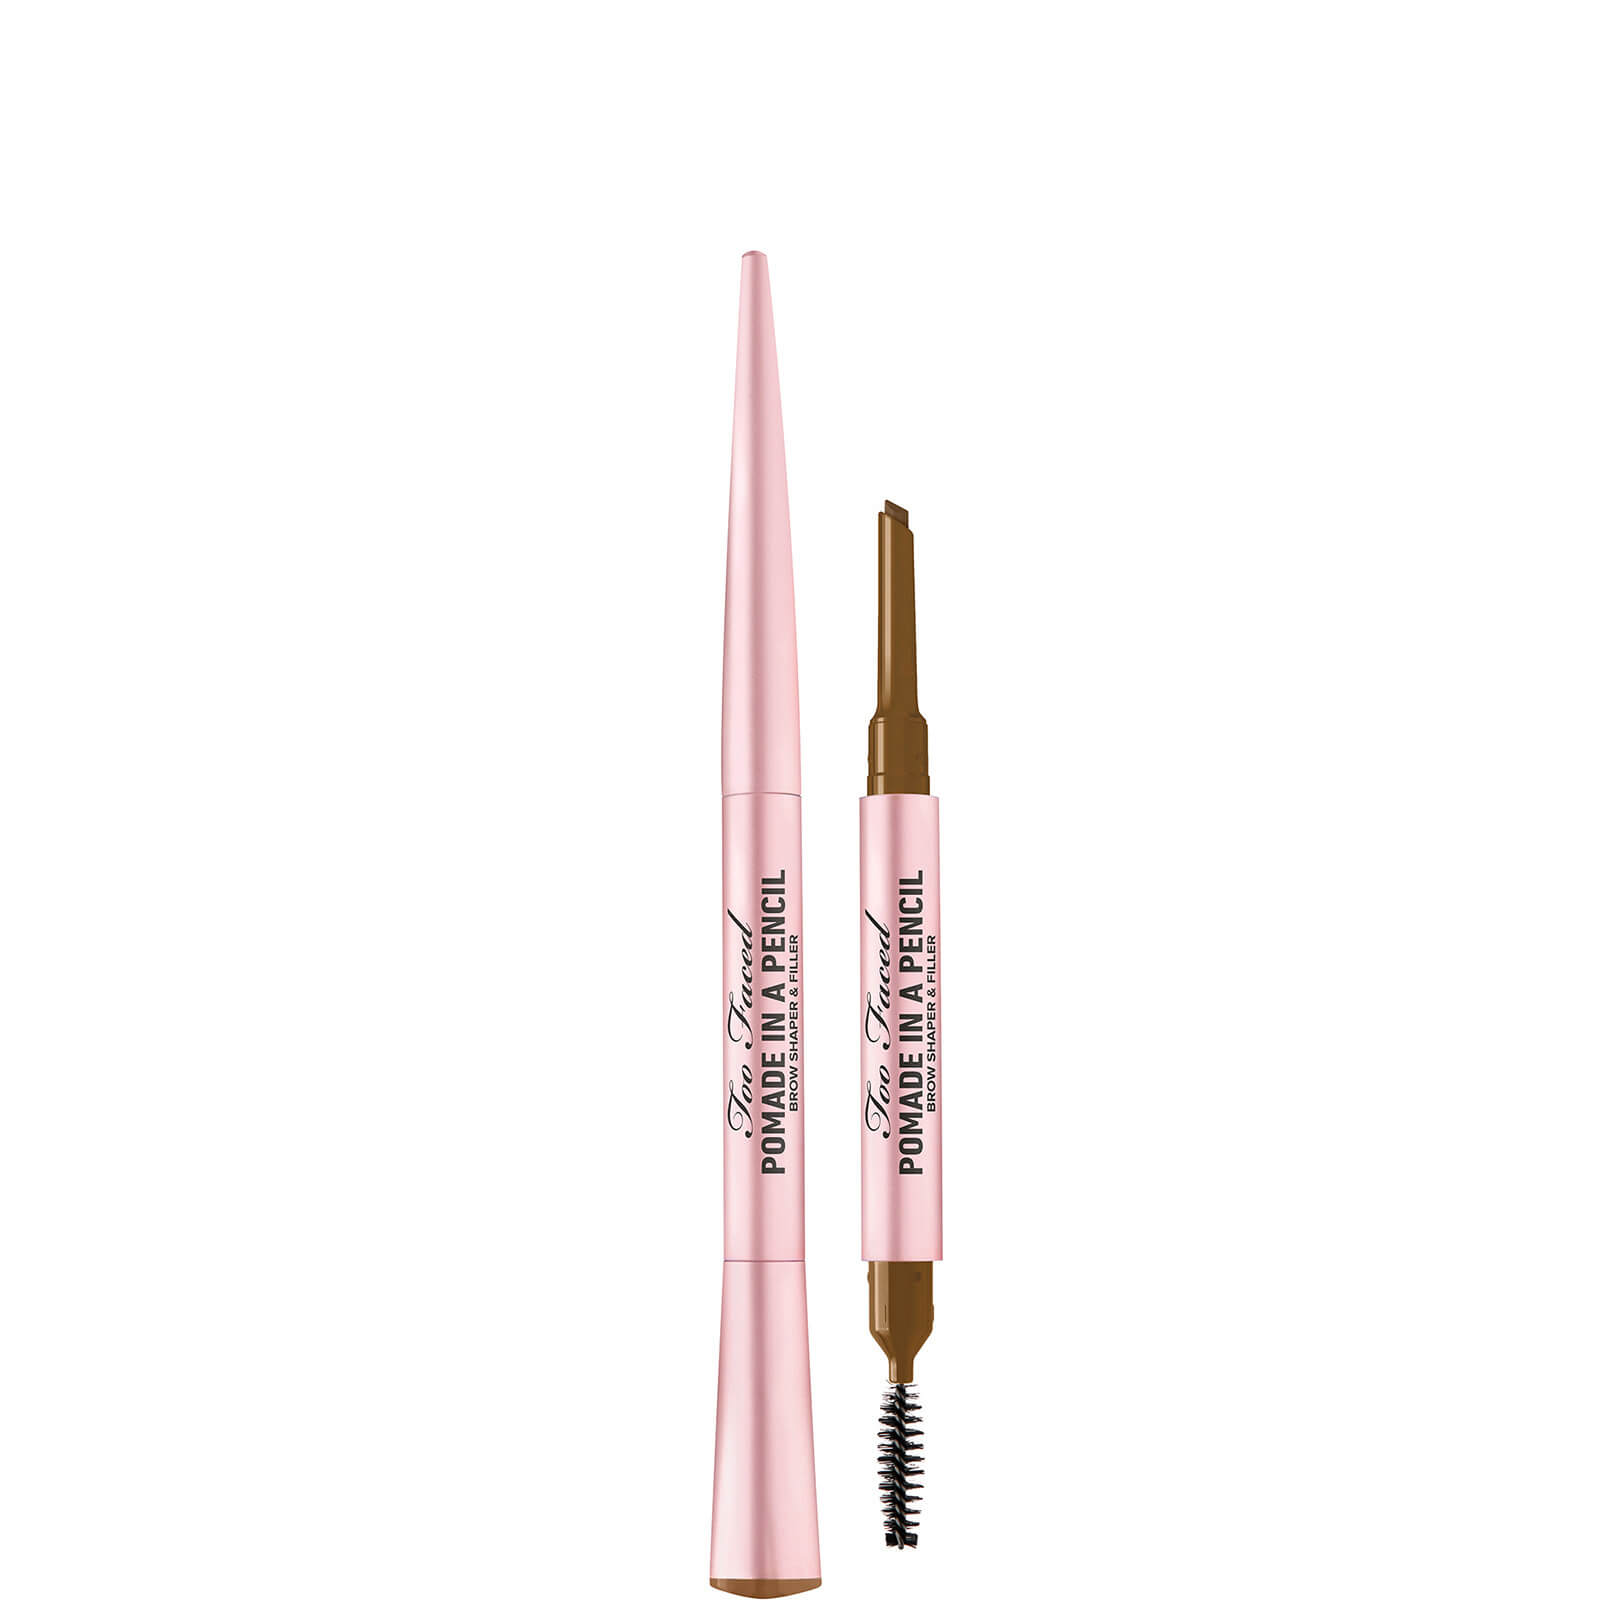 Too Faced Brow Pomade in a Pencil 0.19g (Various Shades) - Medium Brown